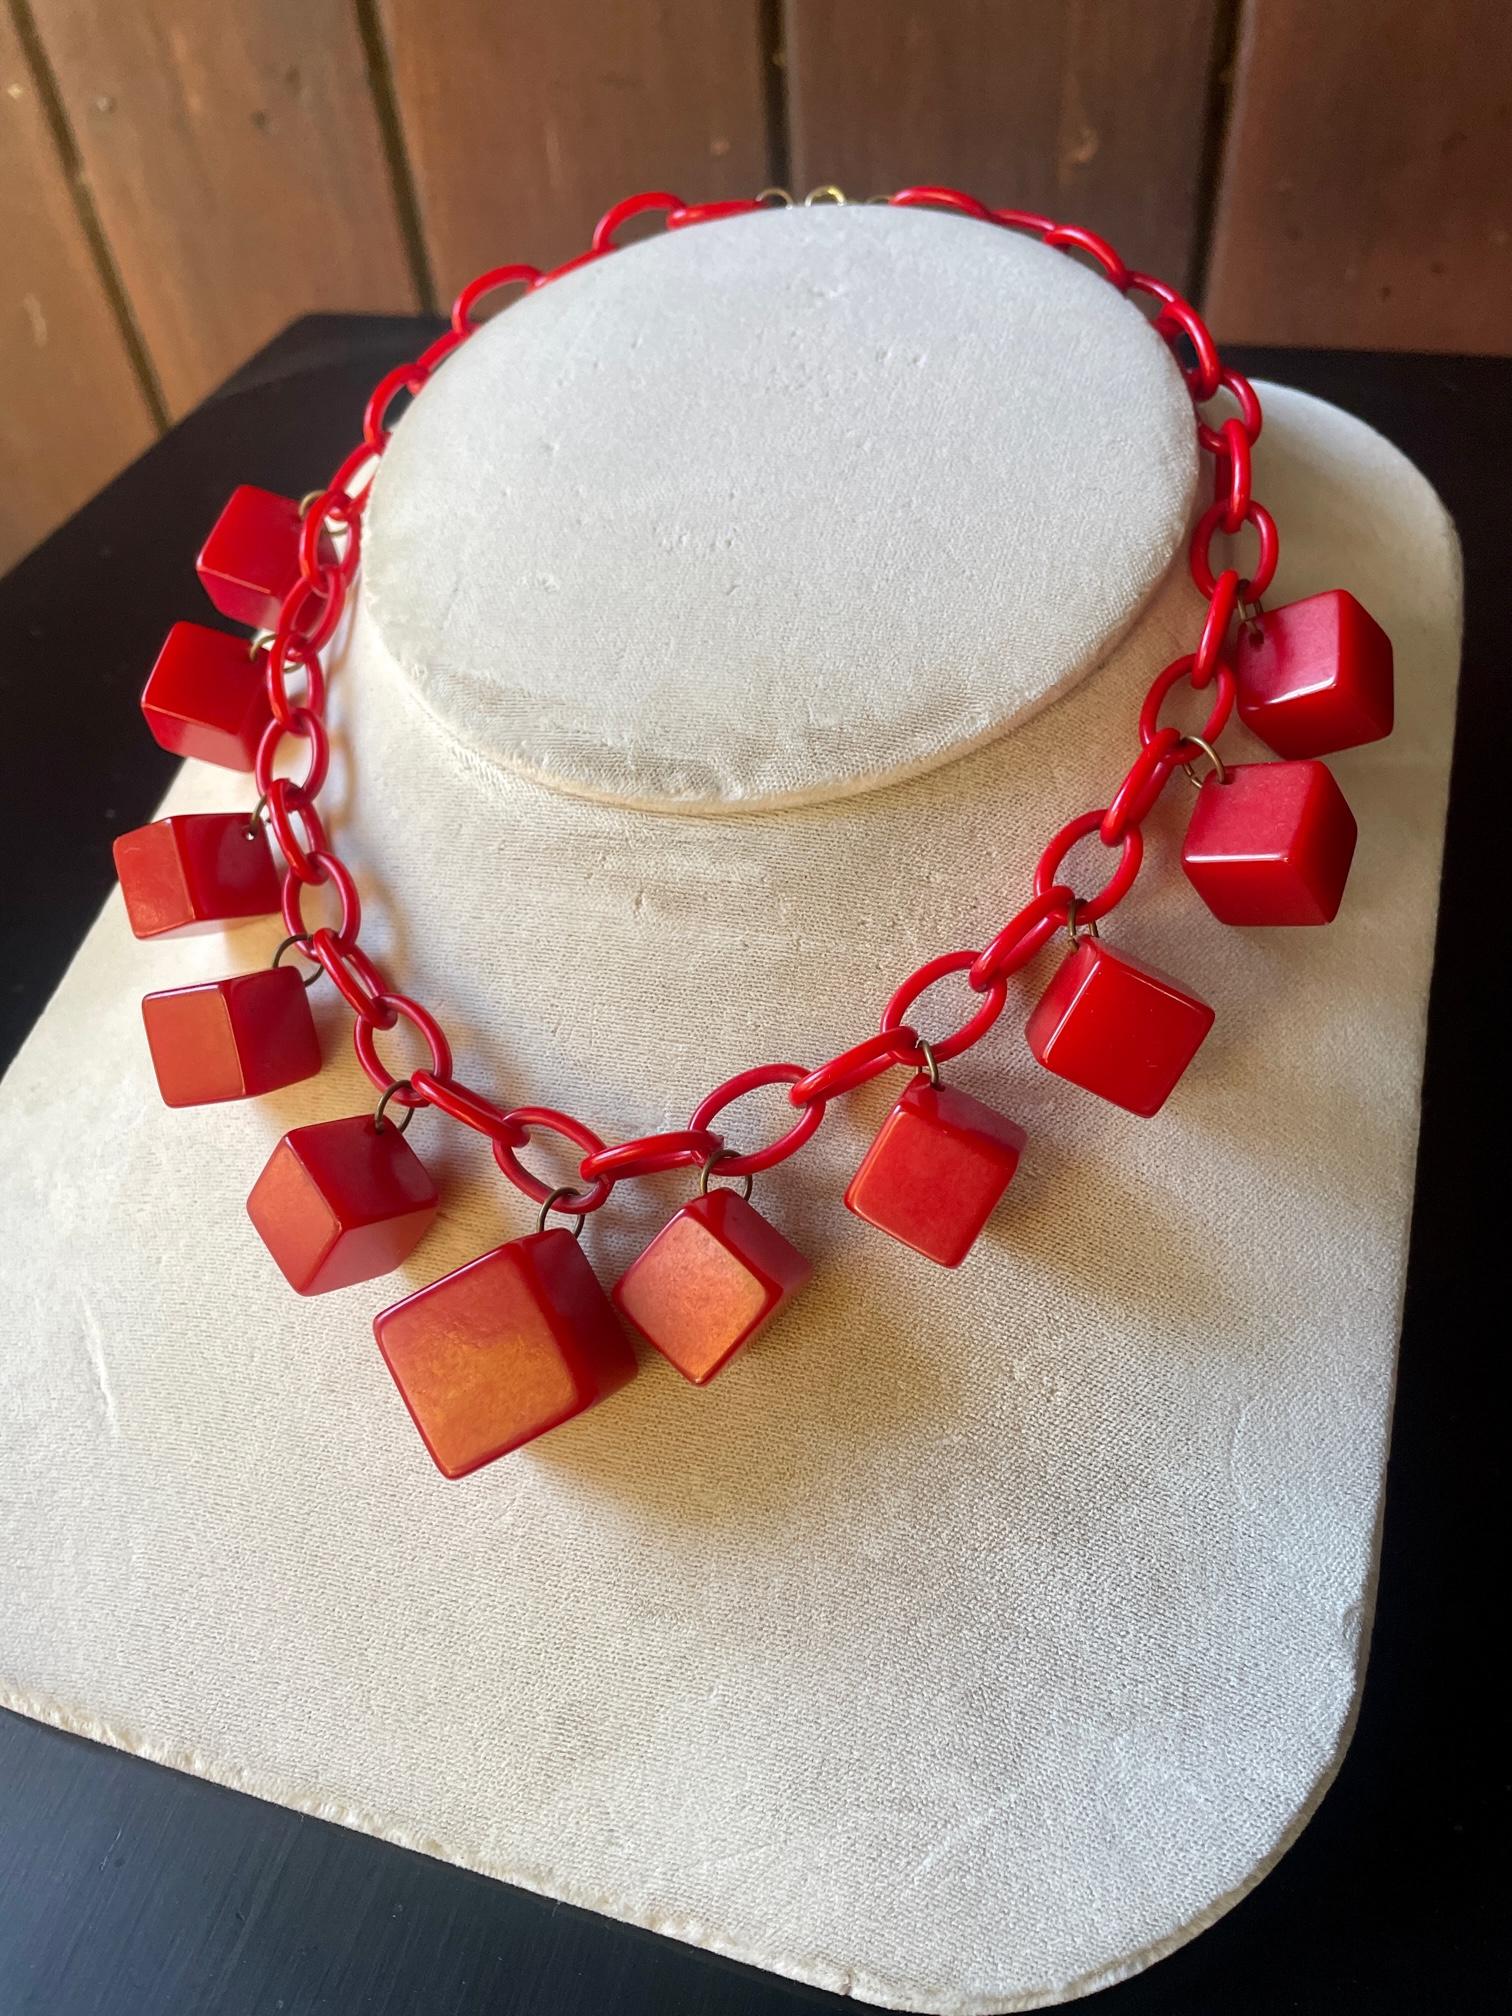 USA c.1930s. Unknown Maker. Celluloid linked chain and Bakelite cube charms.  With a good clasp, this necklace is ready to wear.

Fair Condition because one smaller cube is chipped and drilled. The original mounting hole was chipped so the charm was